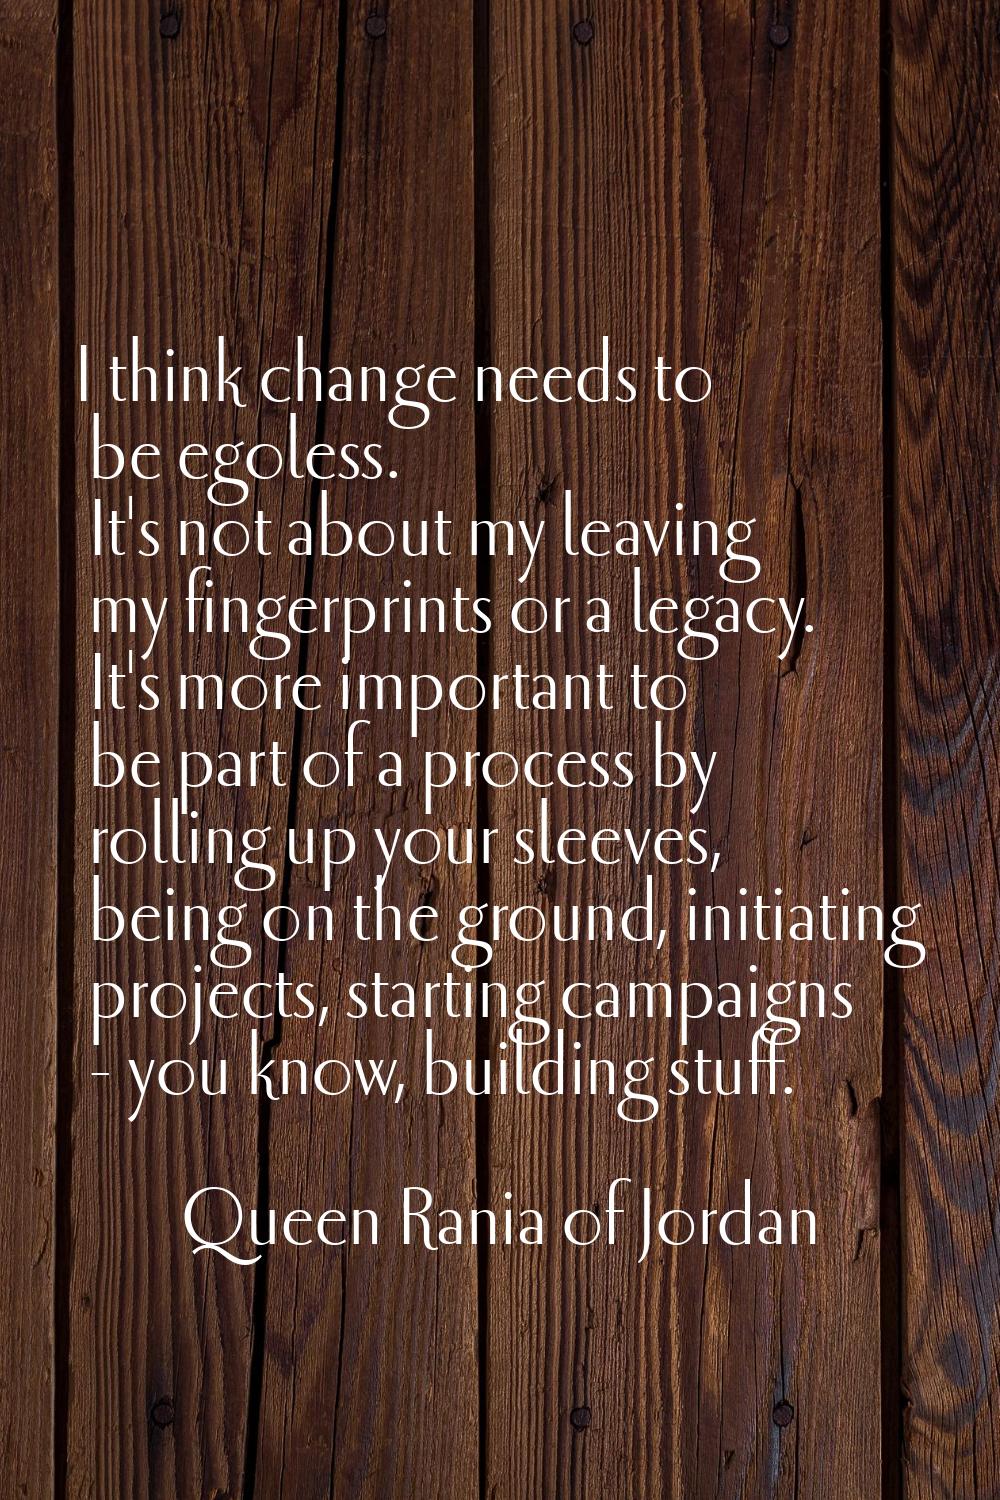 I think change needs to be egoless. It's not about my leaving my fingerprints or a legacy. It's mor